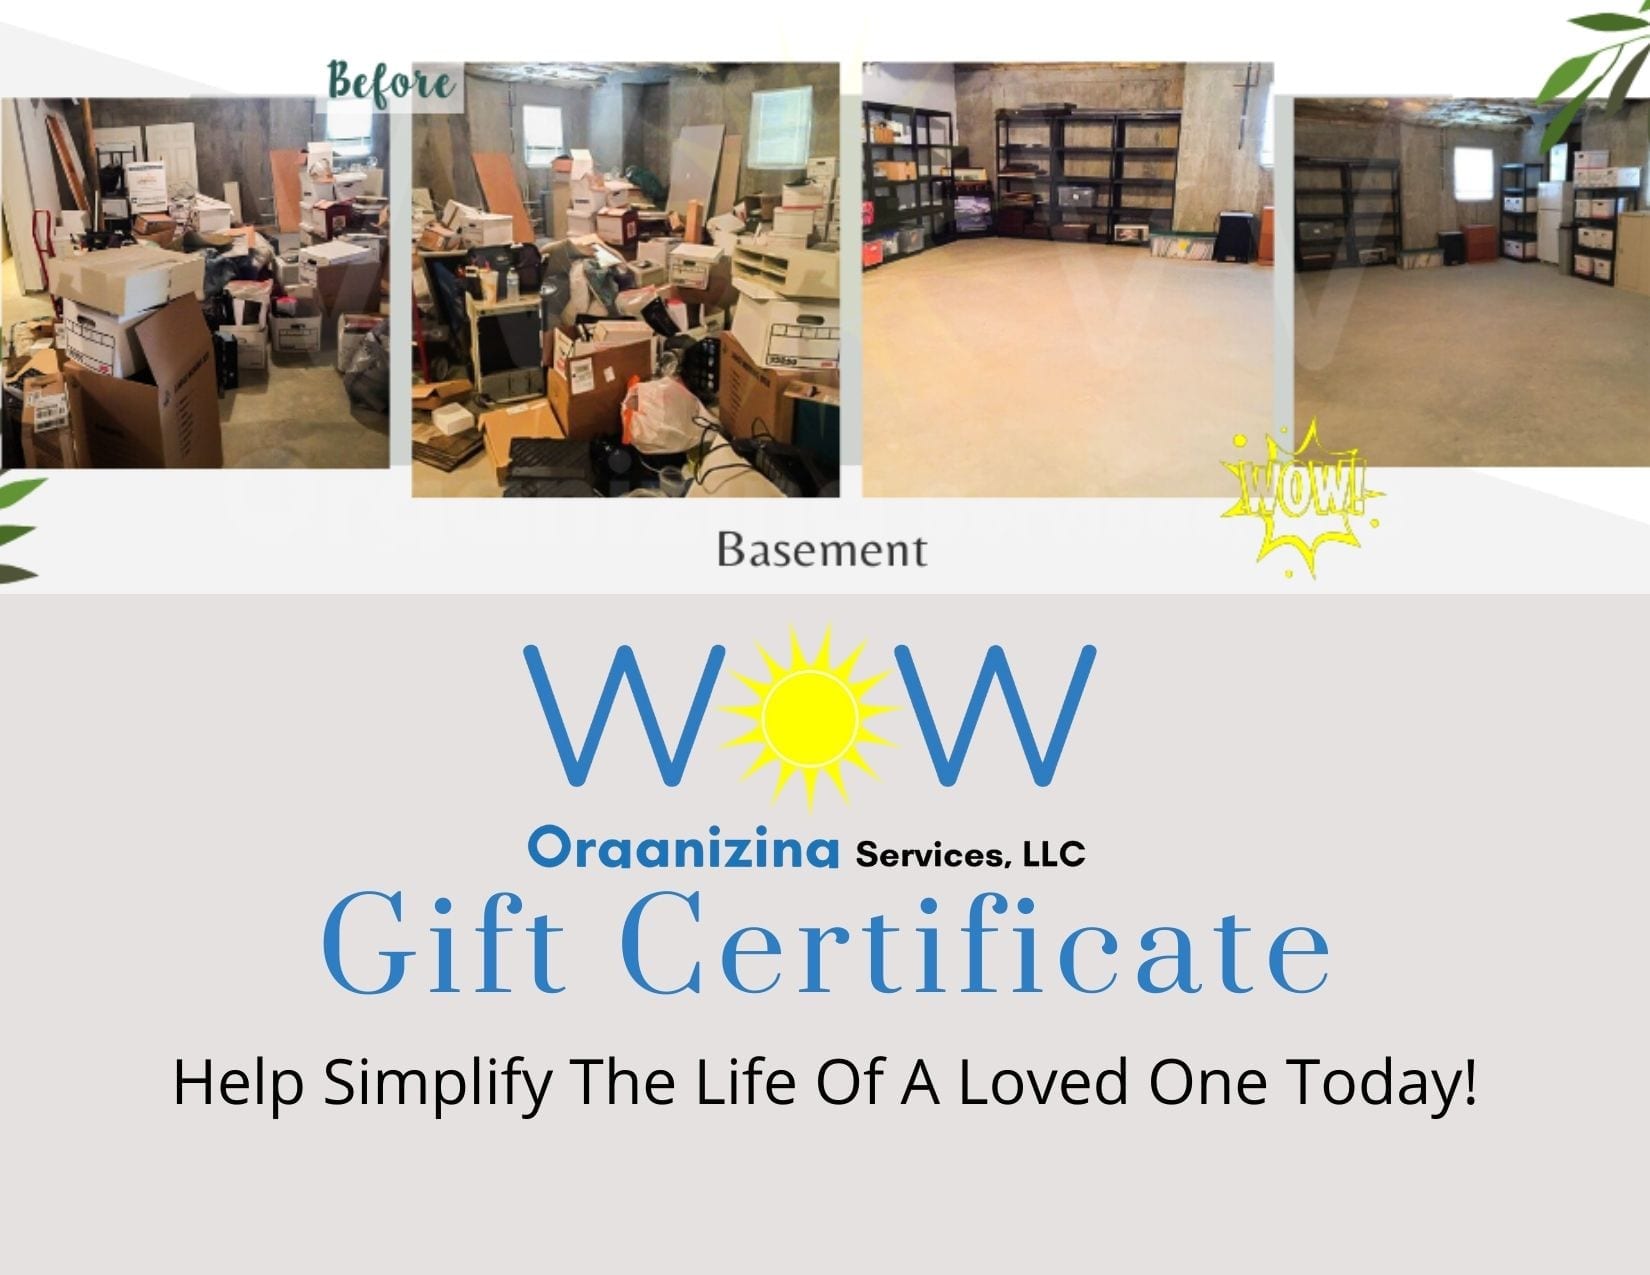 wow organizing services gift certificate